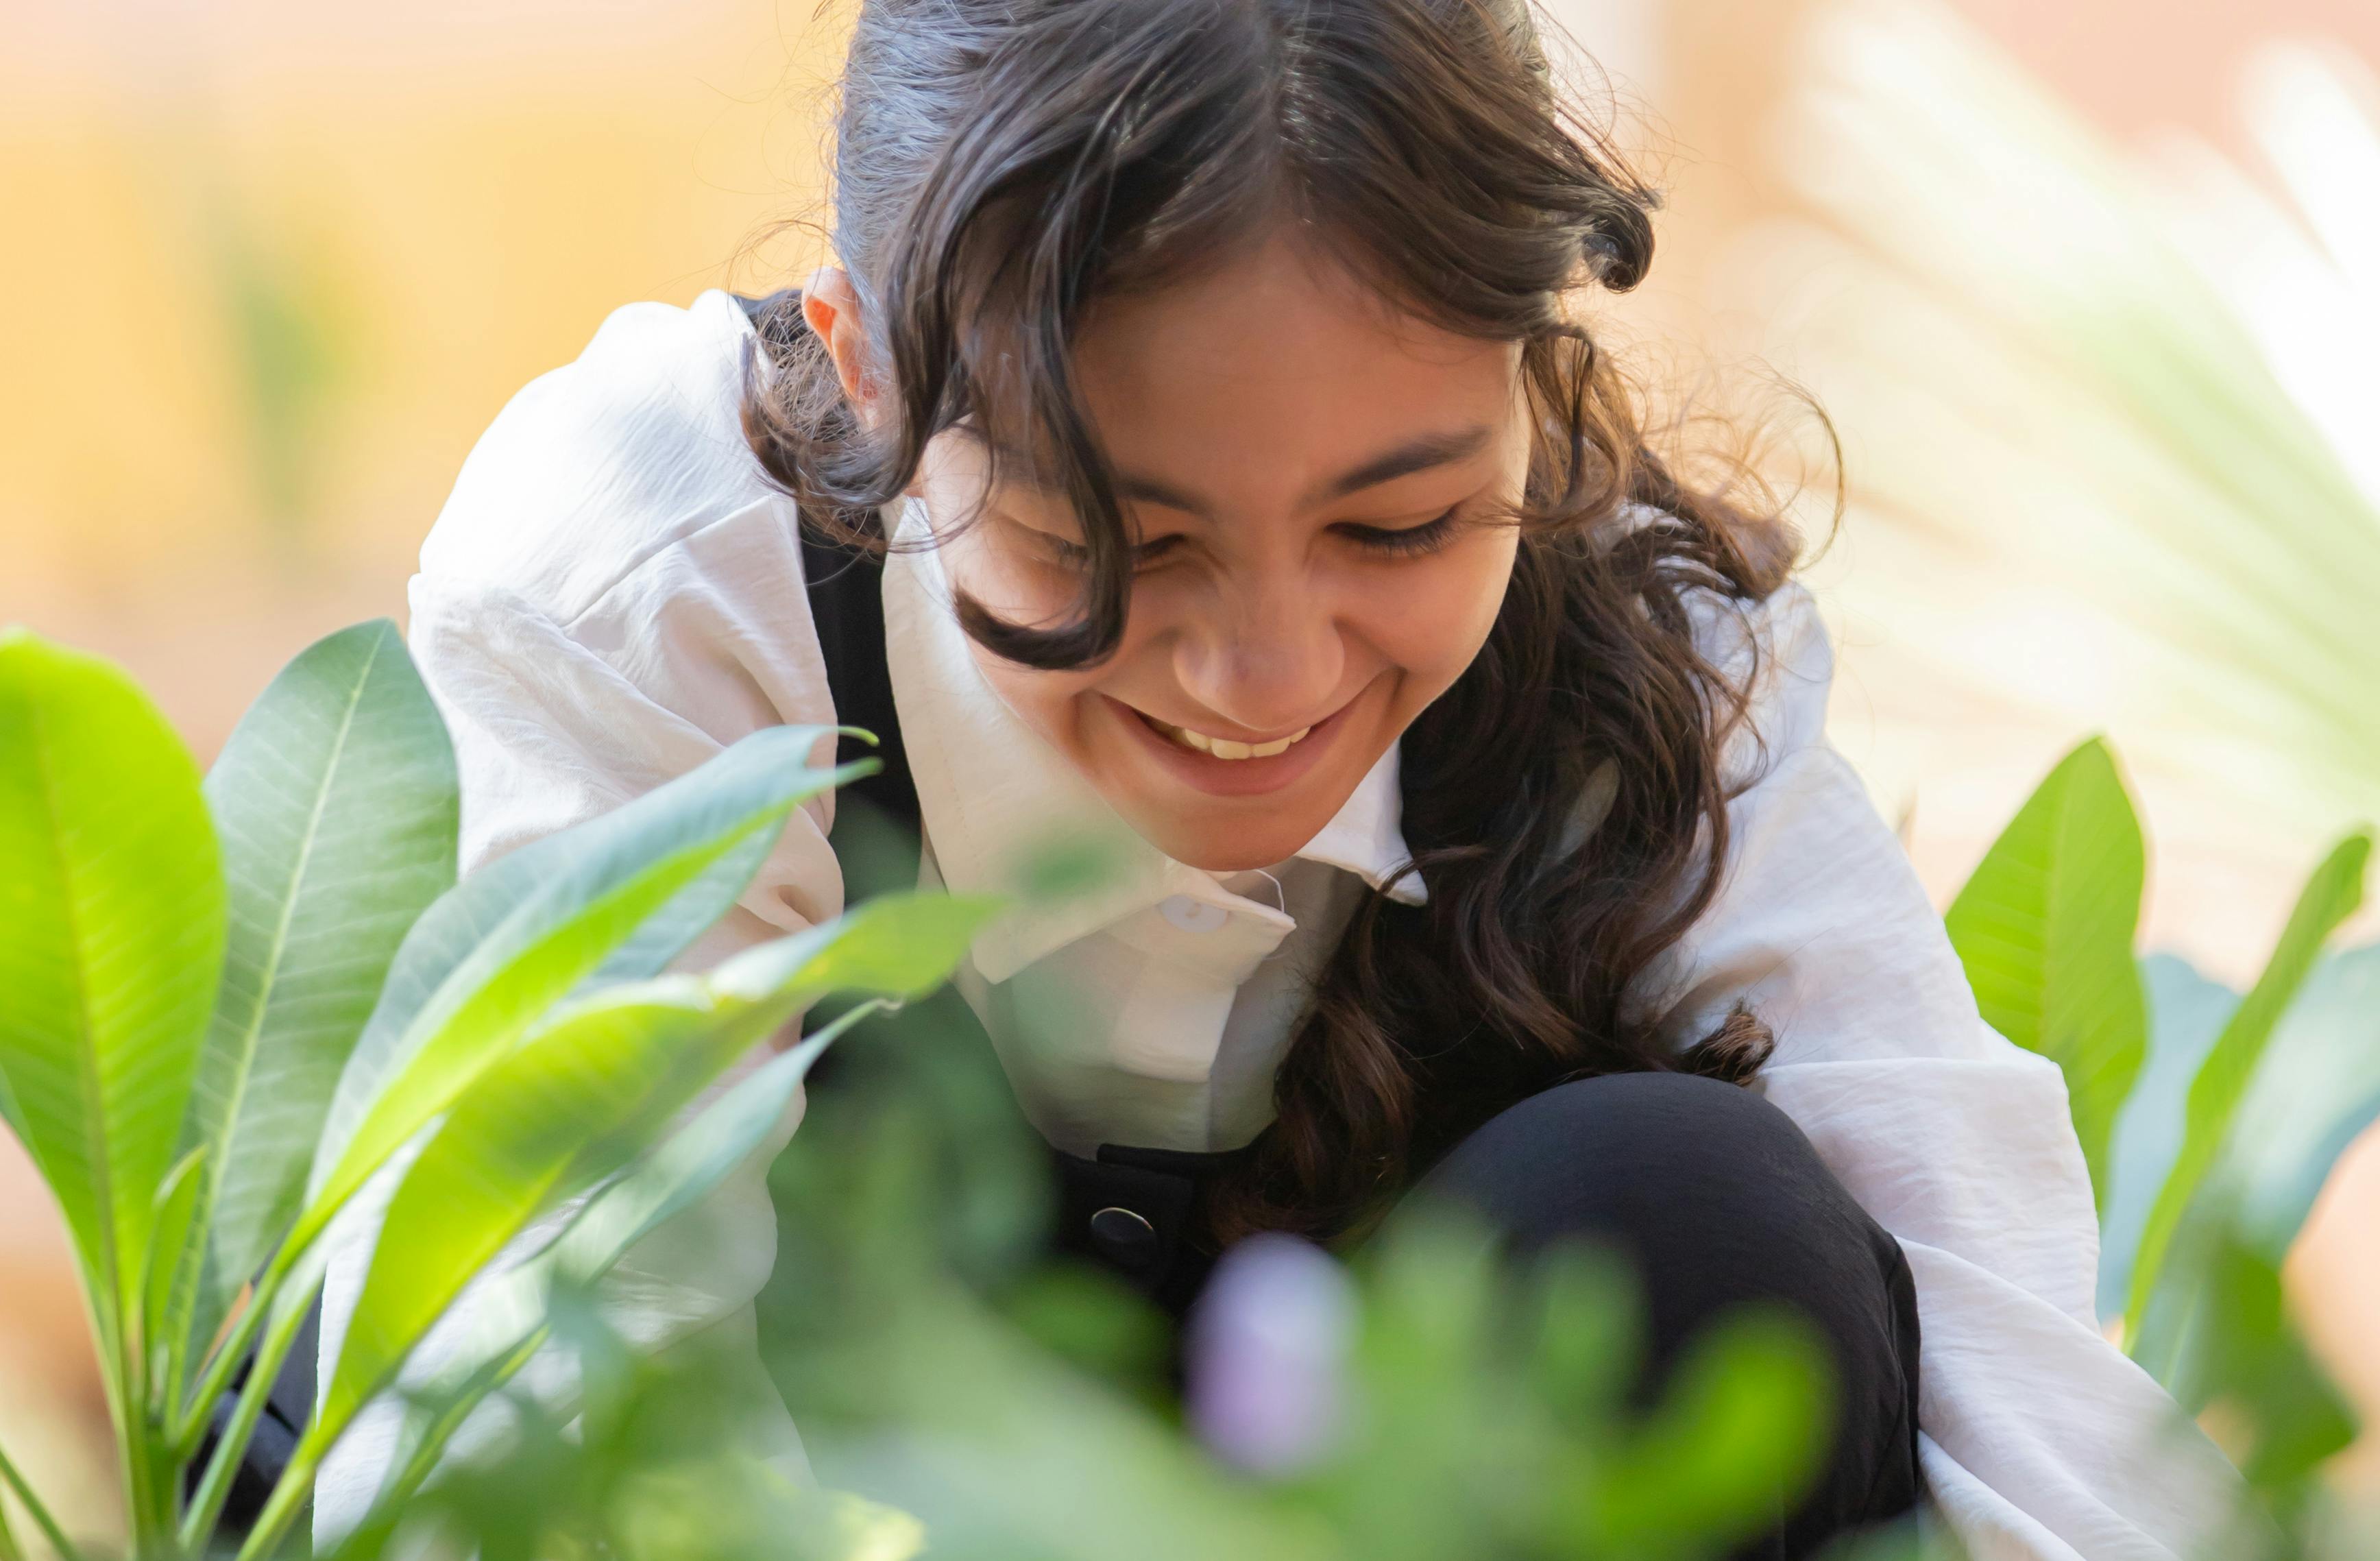 UNICEF summer camp - young girl smiling while attending to garden 